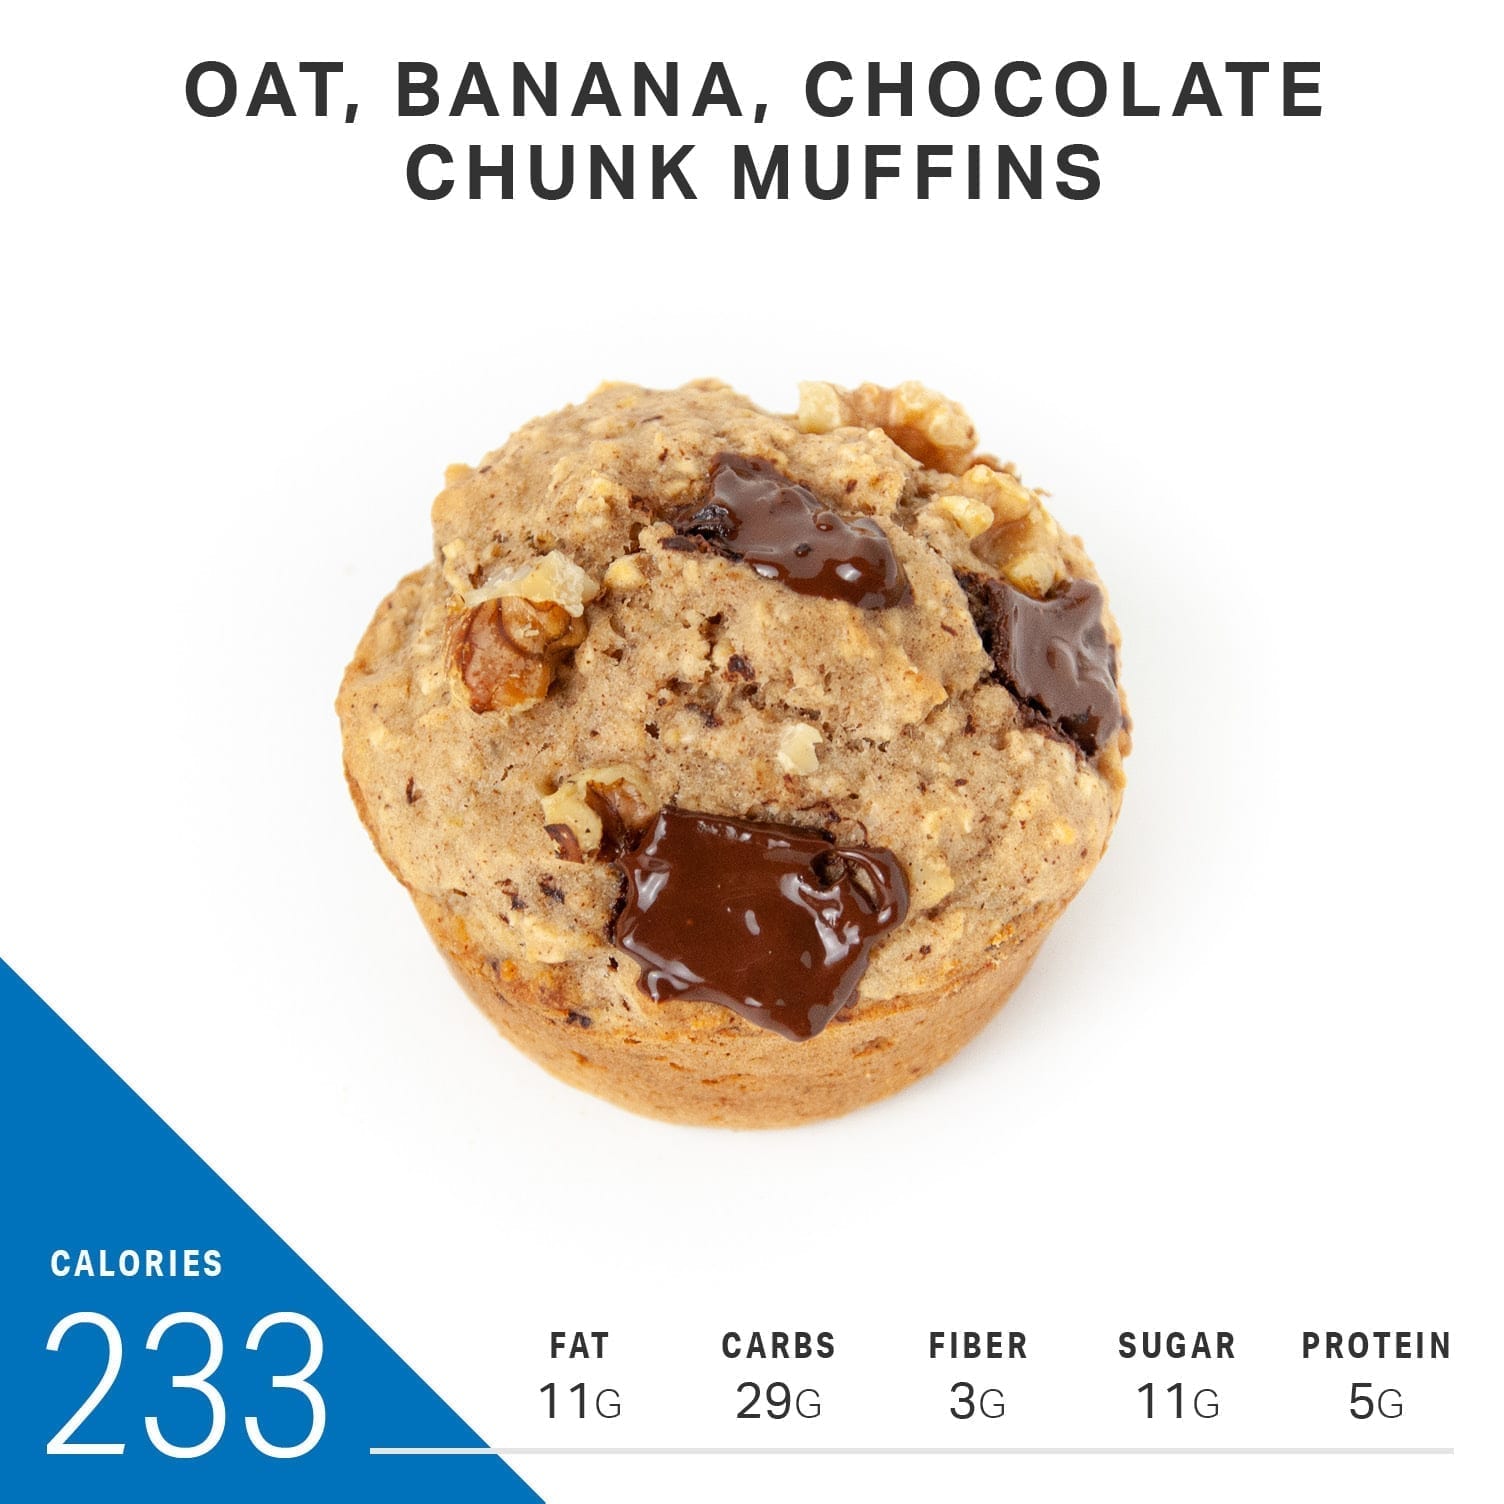 What Desserts With Less Than 260 Calories Look Like